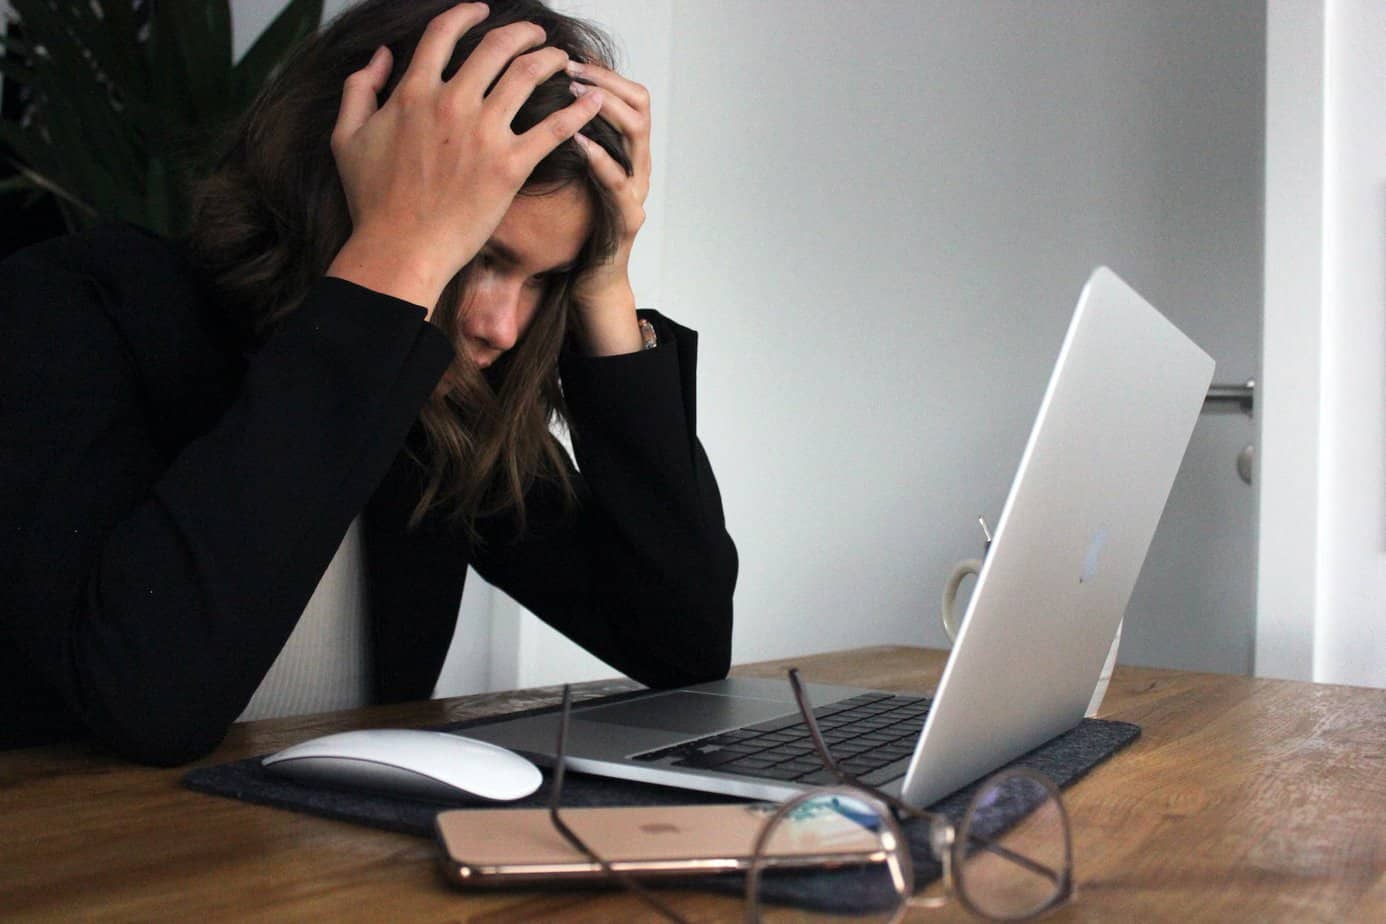 Is your new job stressing you out? It could be your asset